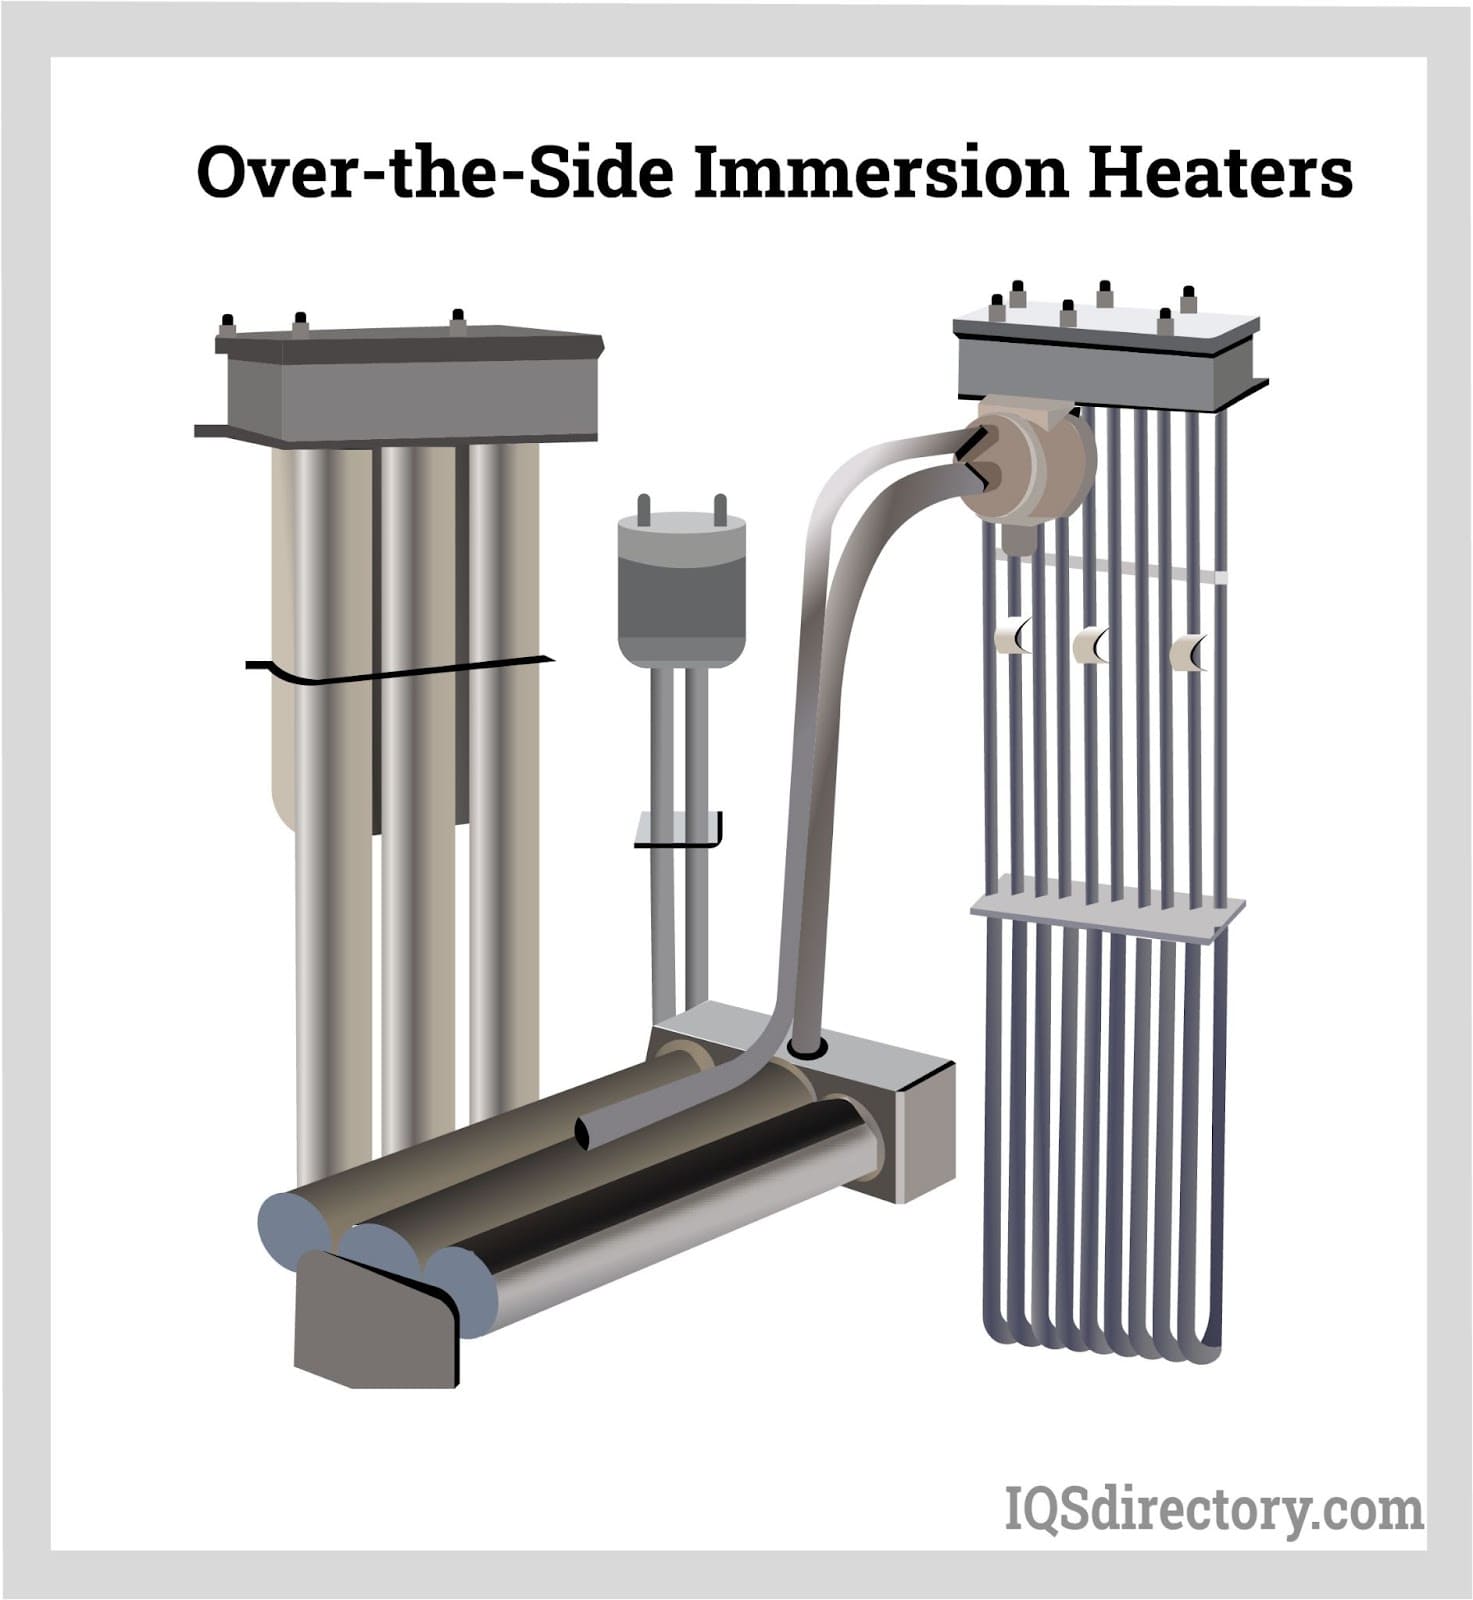 Over-the-Side Immersion Heaters